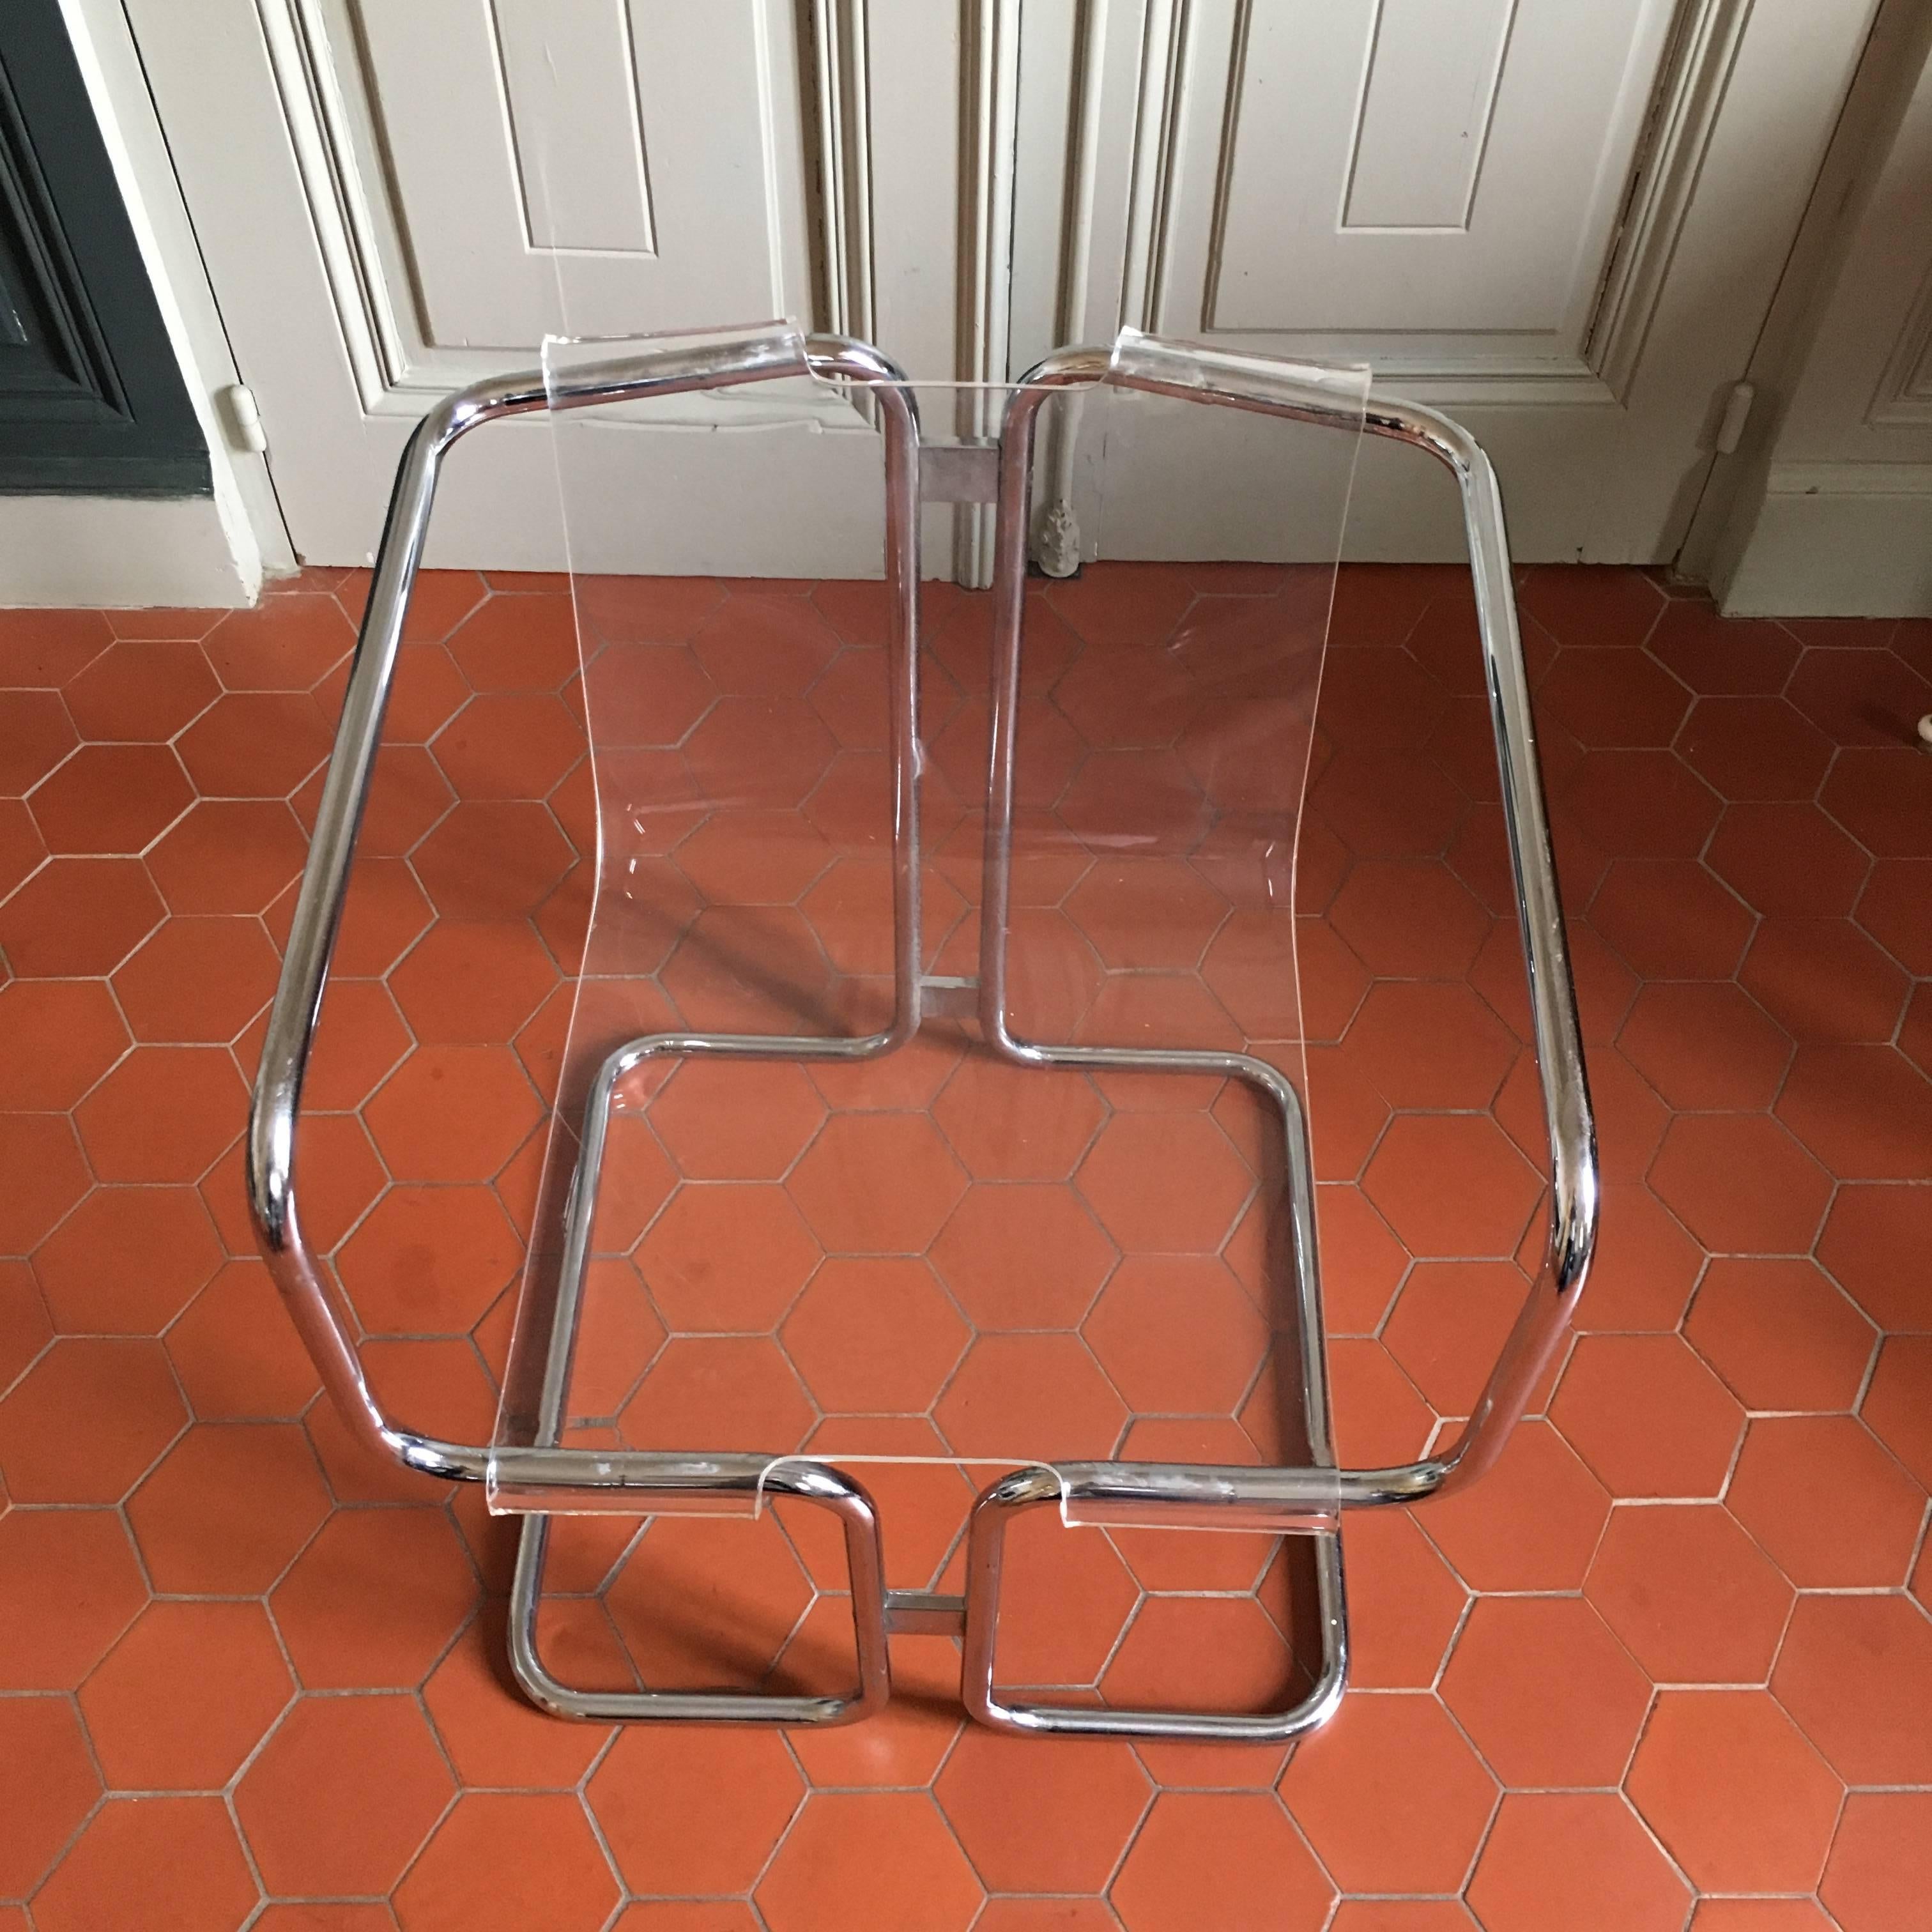 Fabio Lenci Lucite Chairs, Italy, circa 1970 In Excellent Condition For Sale In Fuveau, Provence